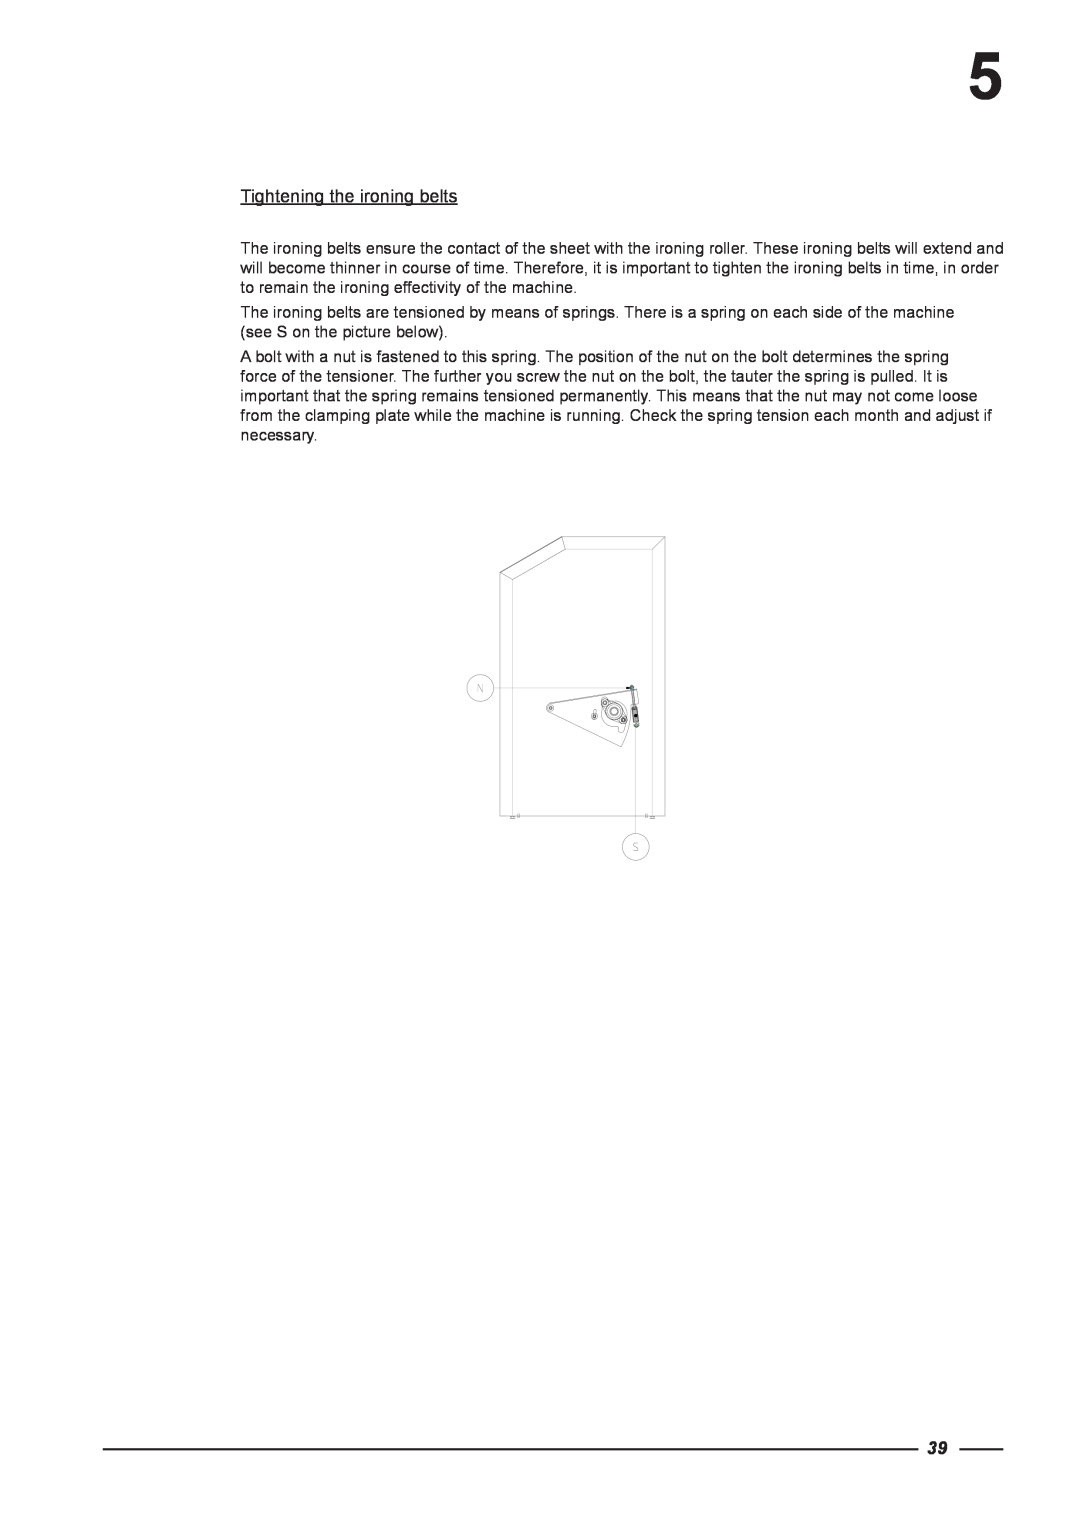 Alliance Laundry Systems CI 2050/325, CI 1650/325 instruction manual Tightening the ironing belts 